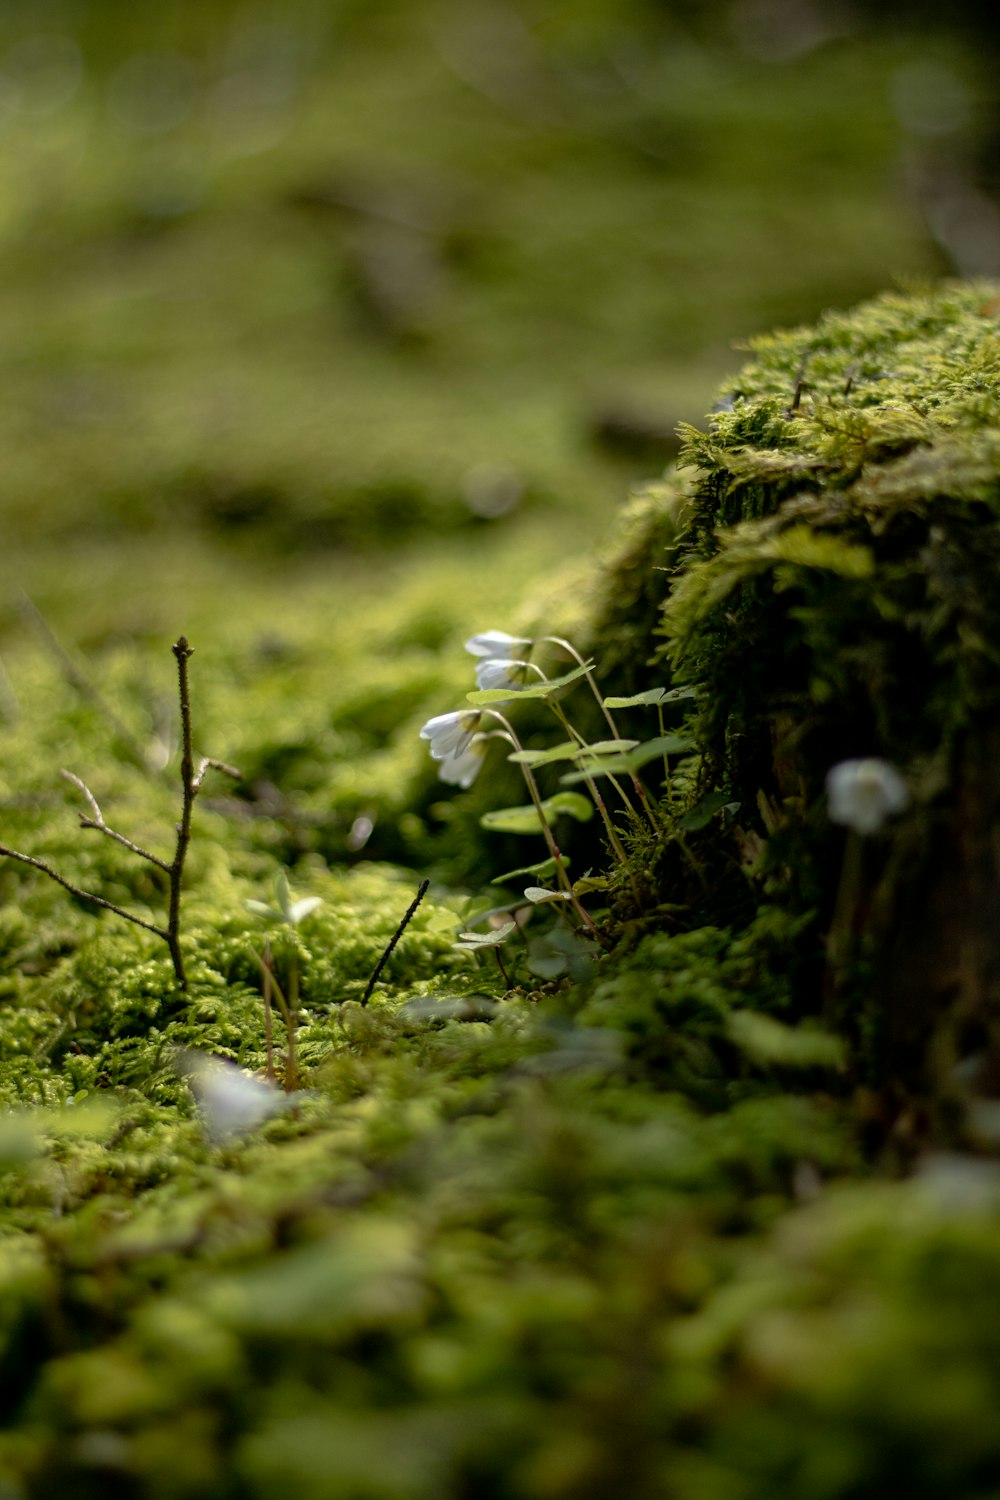 small white flowers growing on a mossy surface